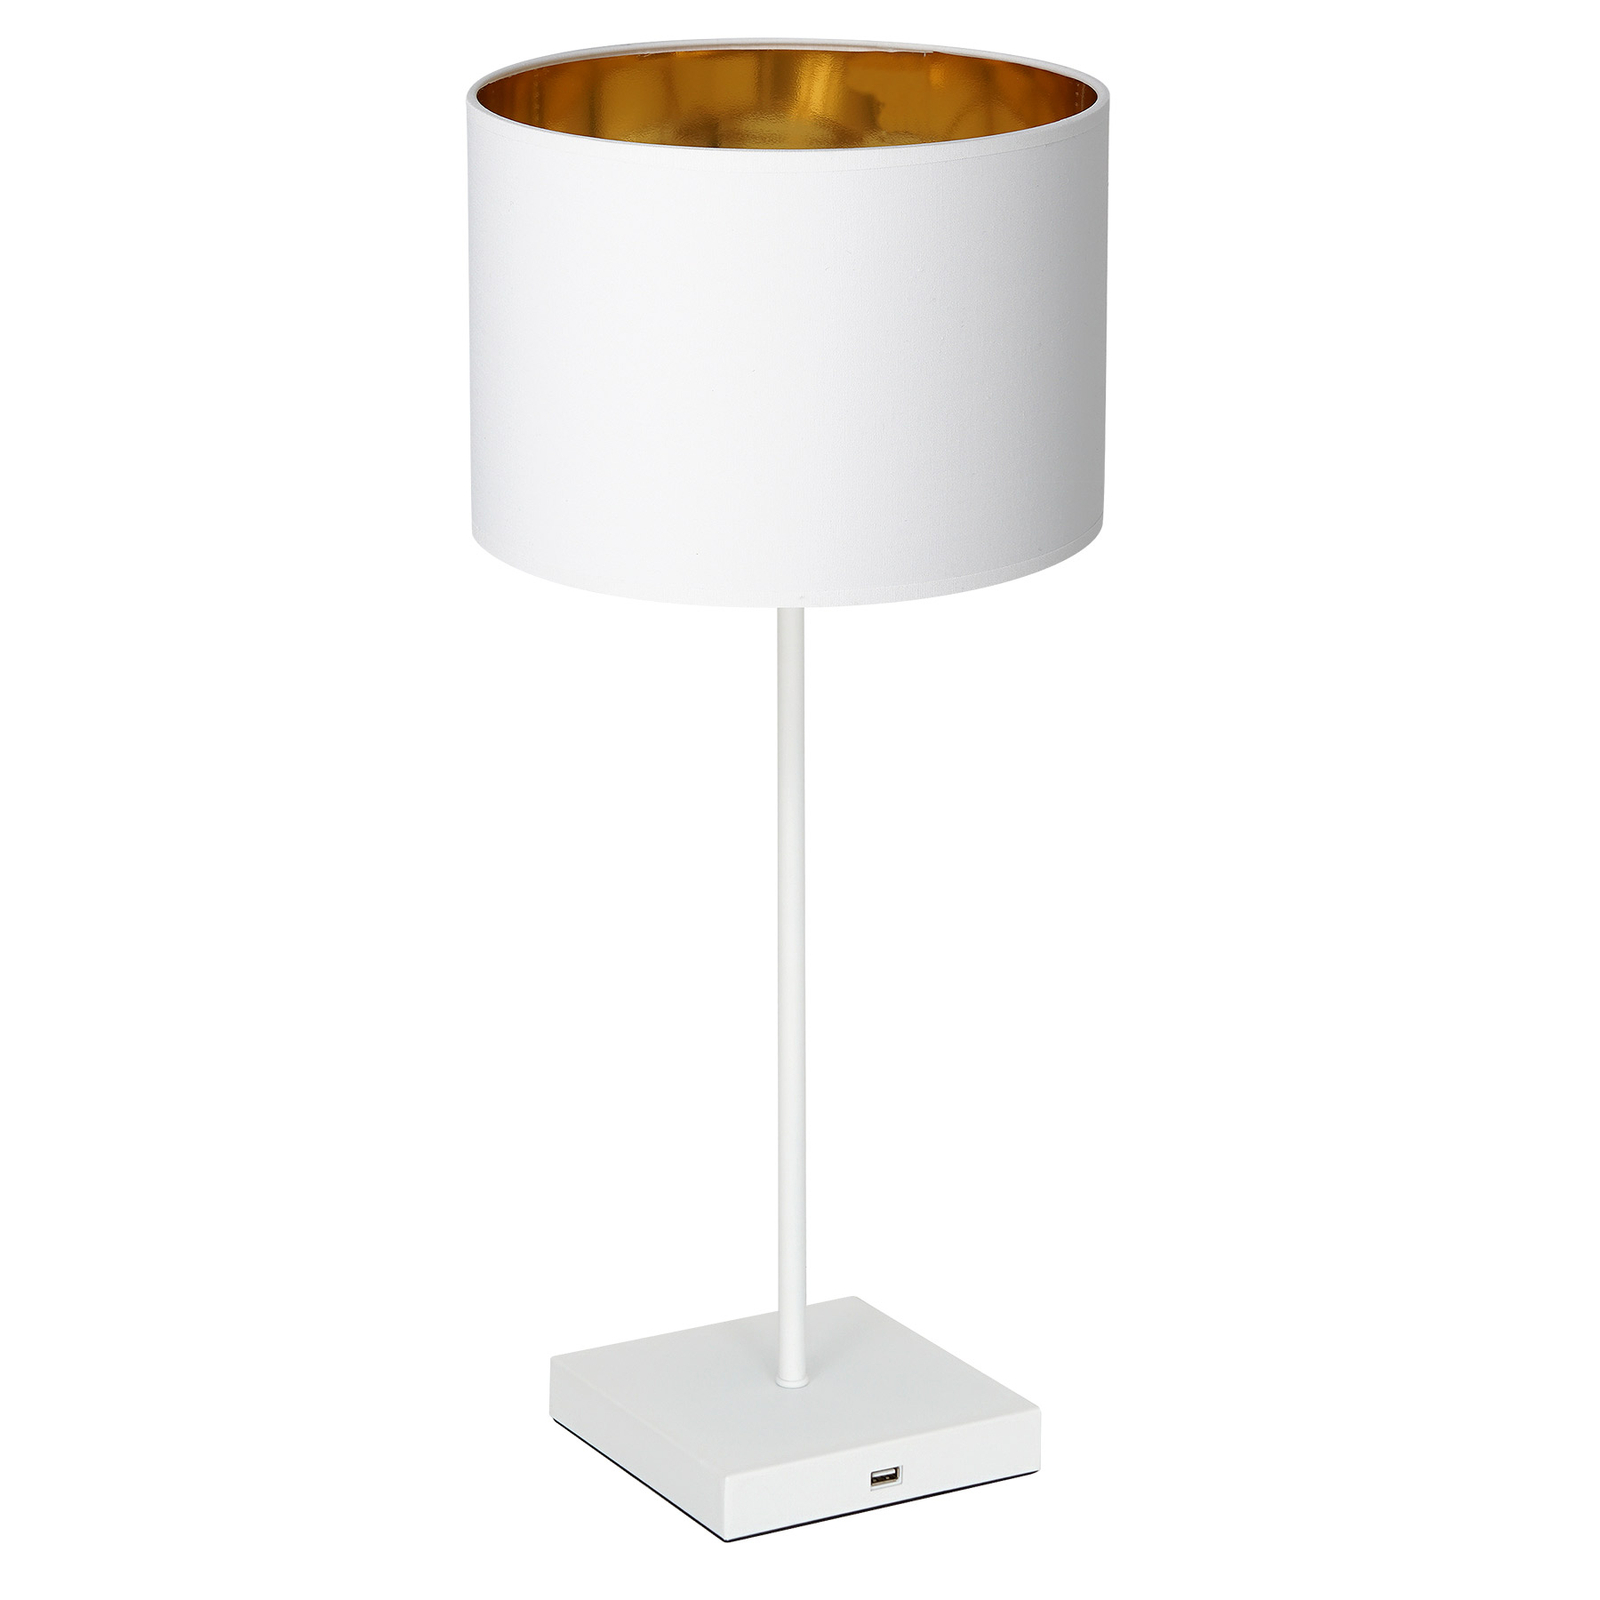 Table white, cylindrical lampshade white/gold